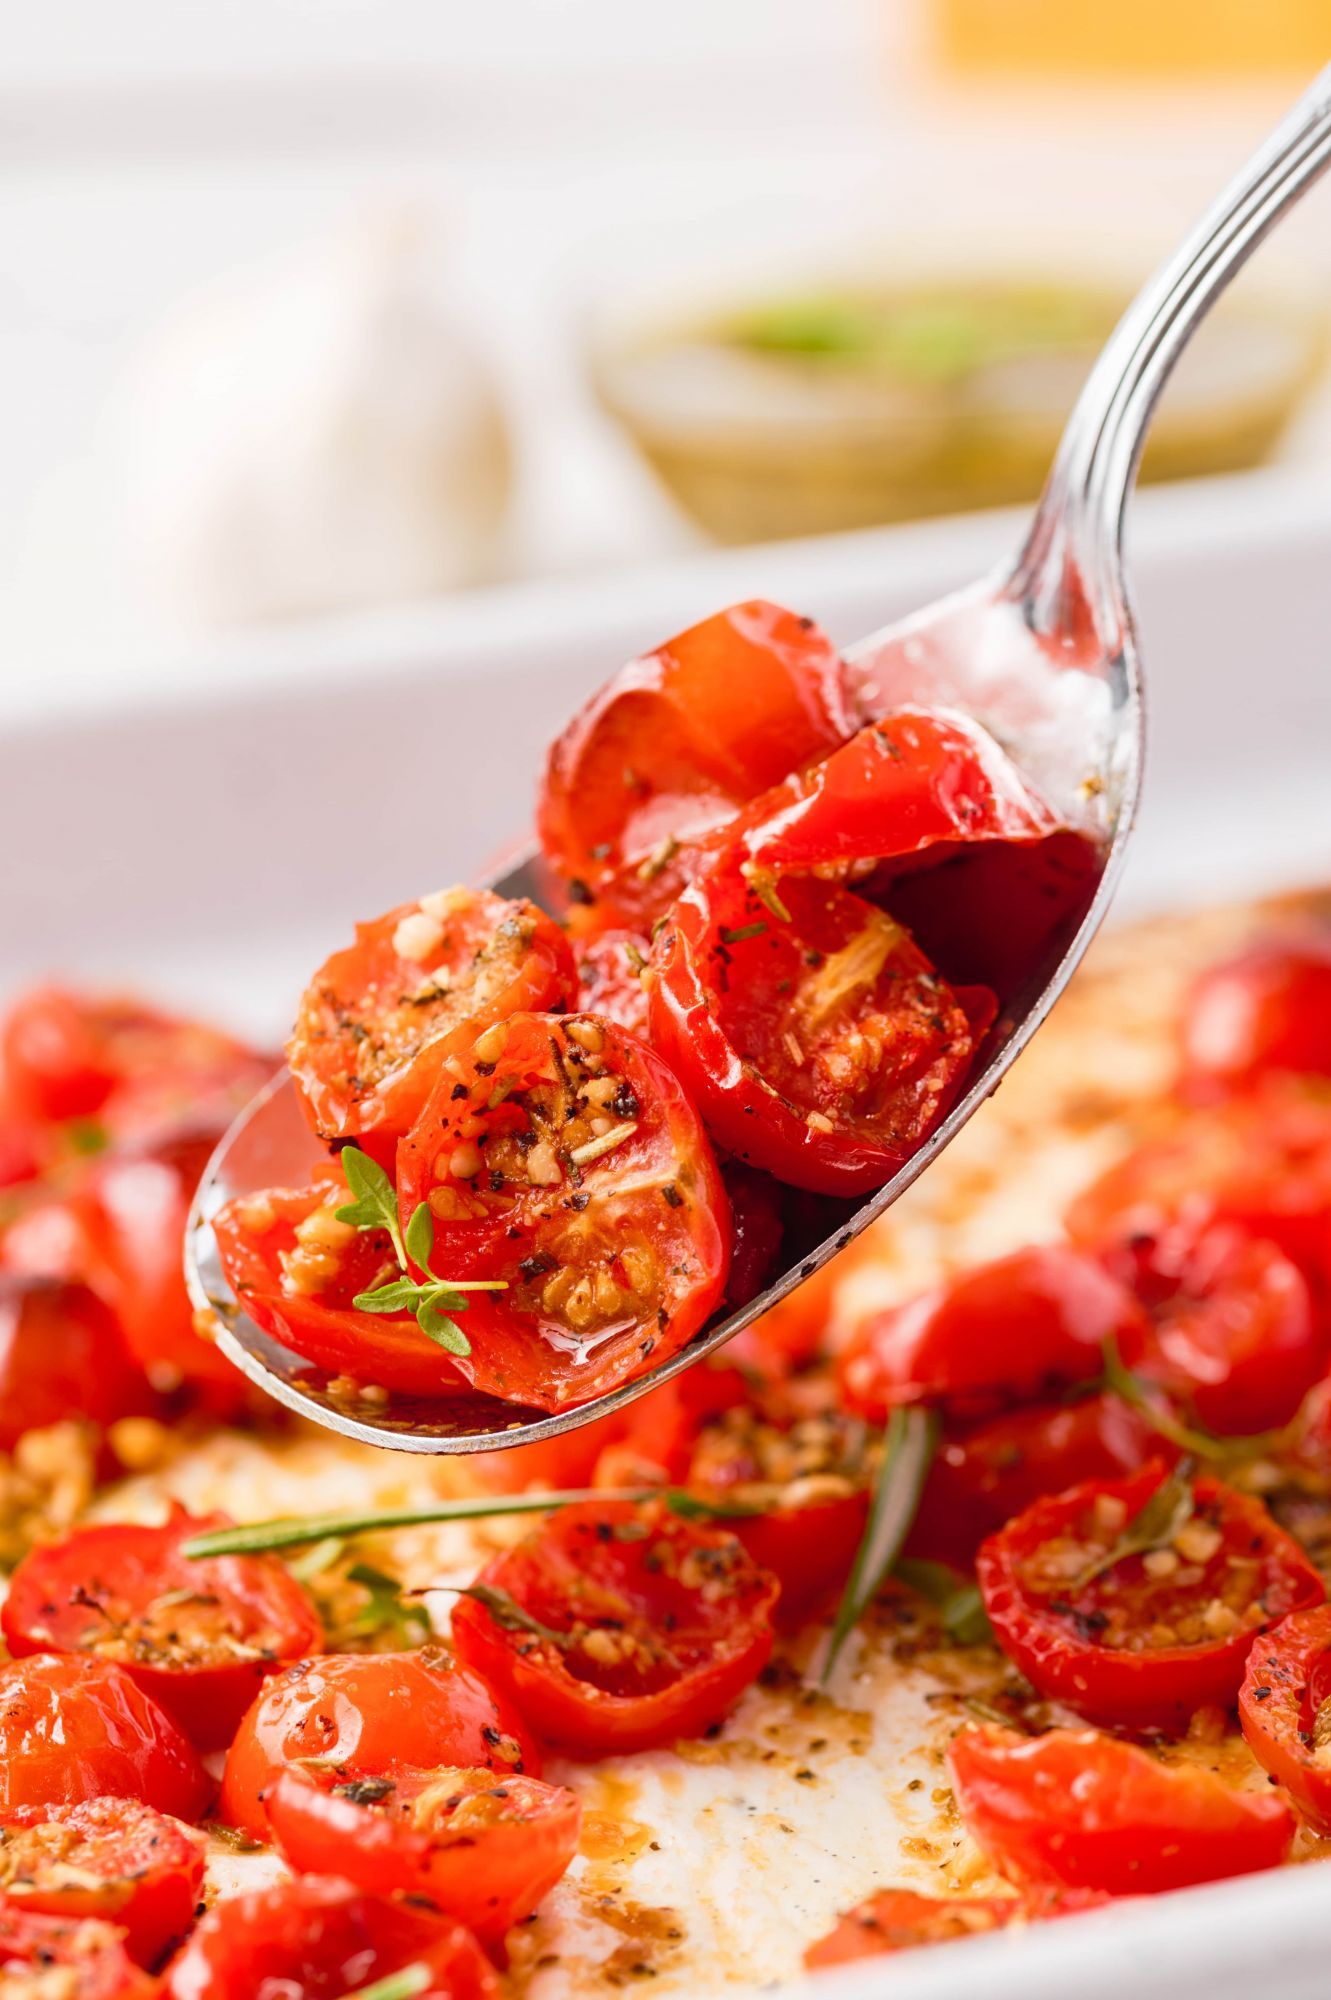 Oven roasted cherry tomatoes with minced garlic, Italian seasoning, and olive oil on a silver spoon.